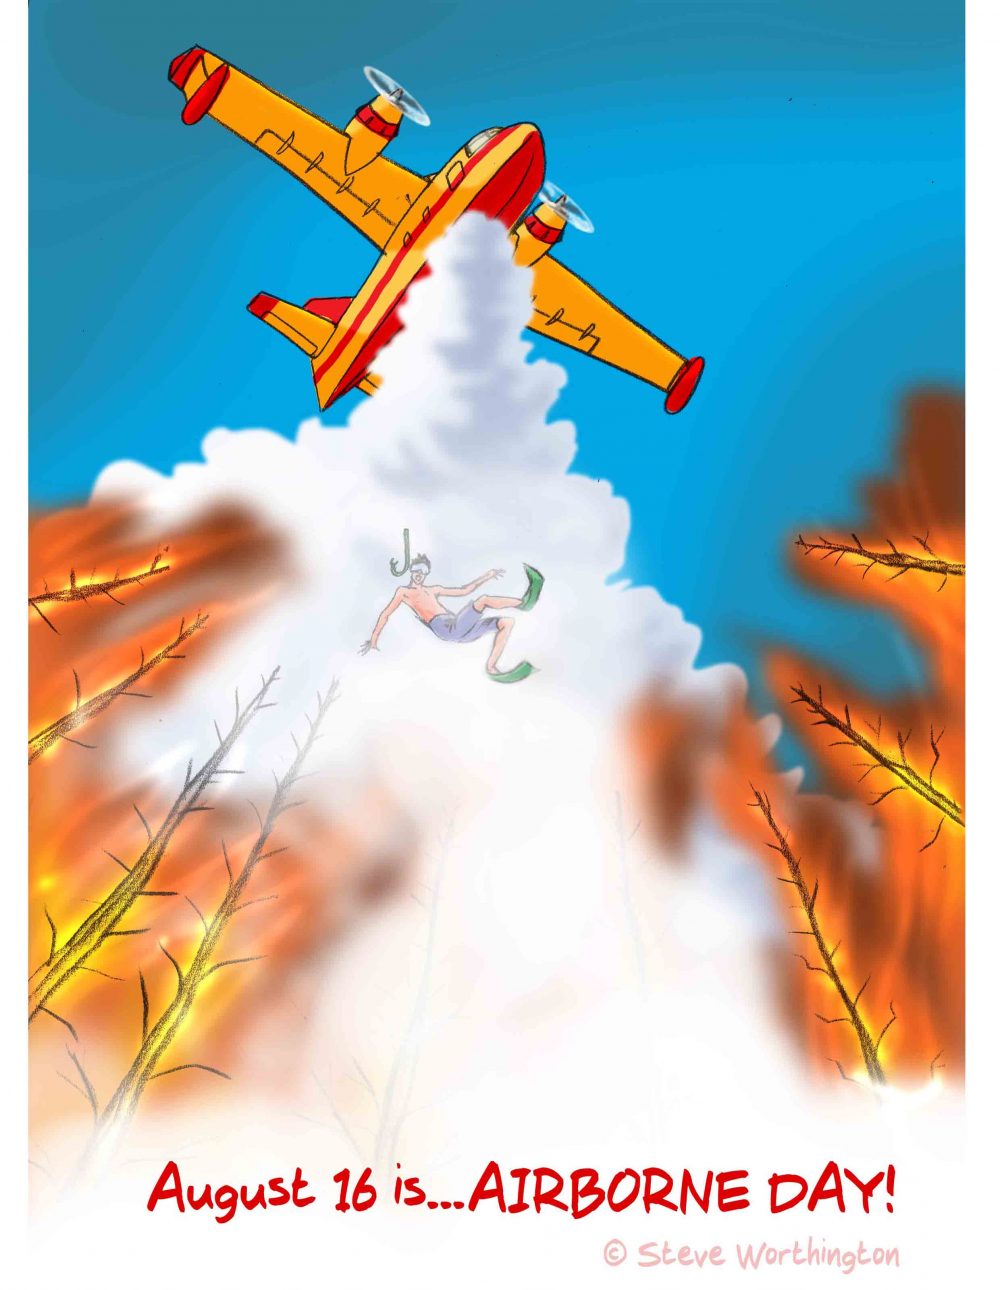 Color illustration for August 16, airborne day showing a snorkeler being dropped onto a forest fire by a firefighter air tanker